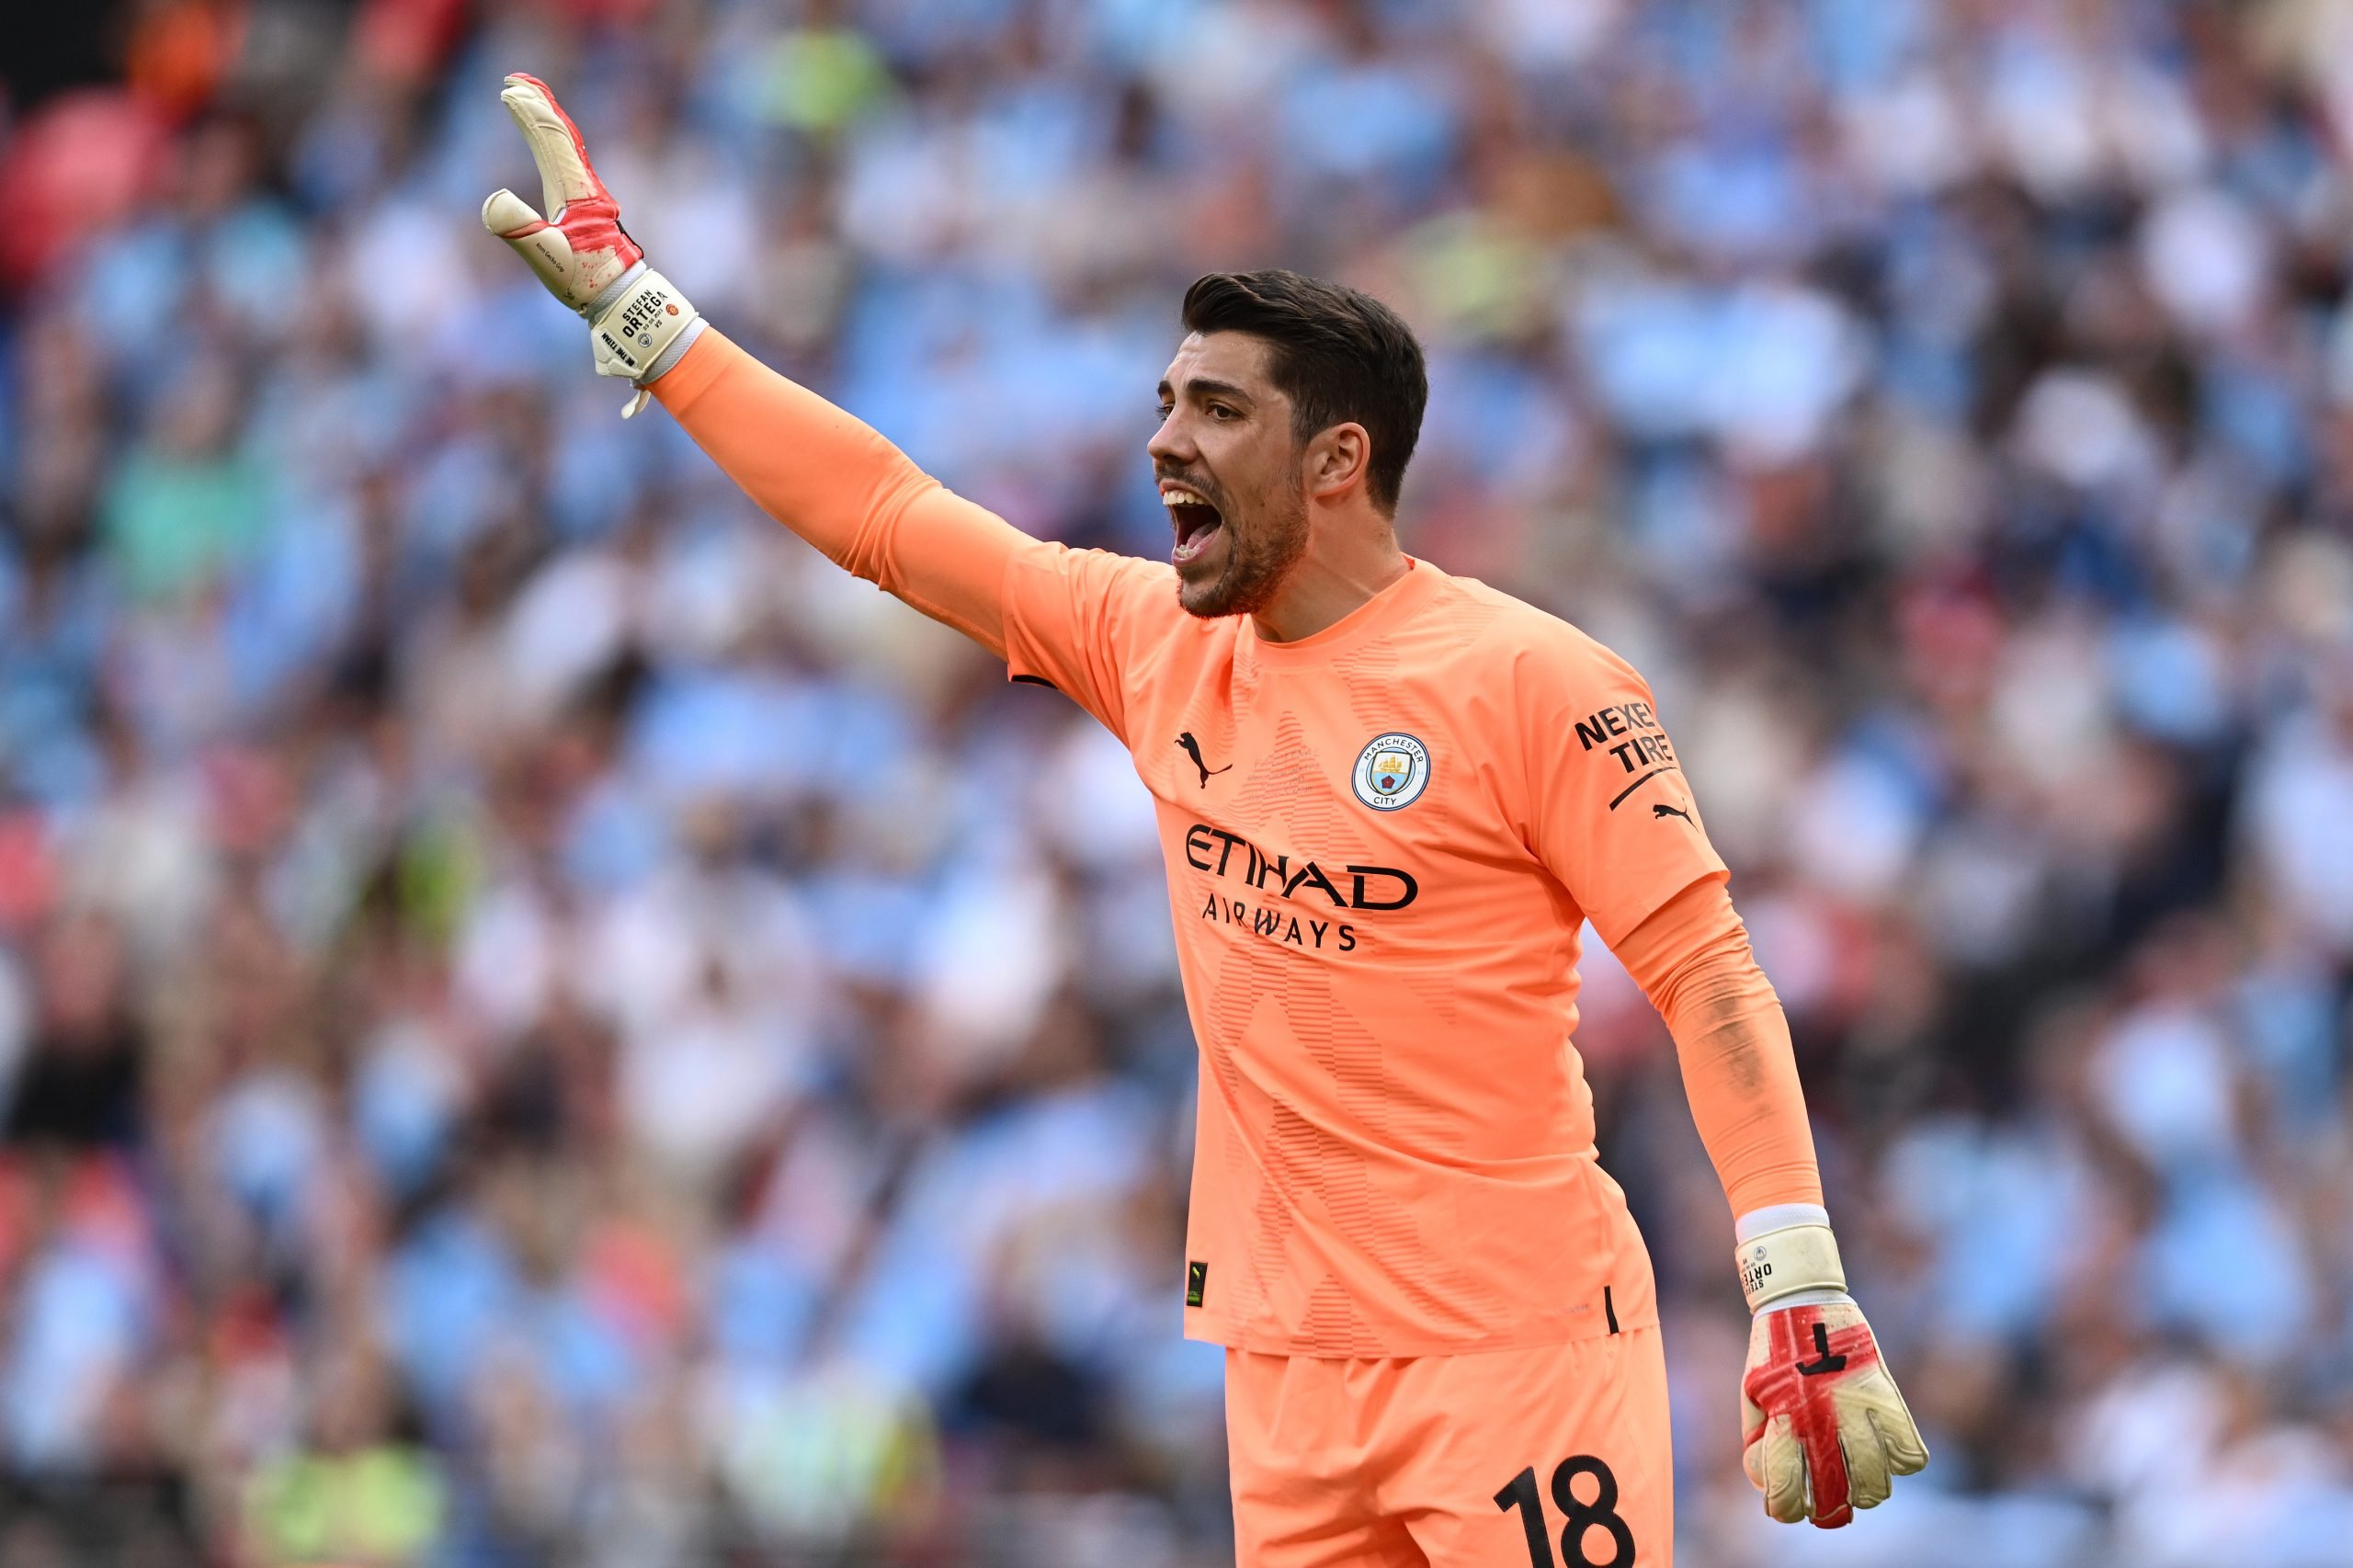 LONDON, ENGLAND - JUNE 03: Stefan Ortega of Manchester City in action during the Emirates FA Cup Final between Manchester City and Manchester United at Wembley Stadium on June 03, 2023 in London, England. (Photo by Mike Hewitt/Getty Images)